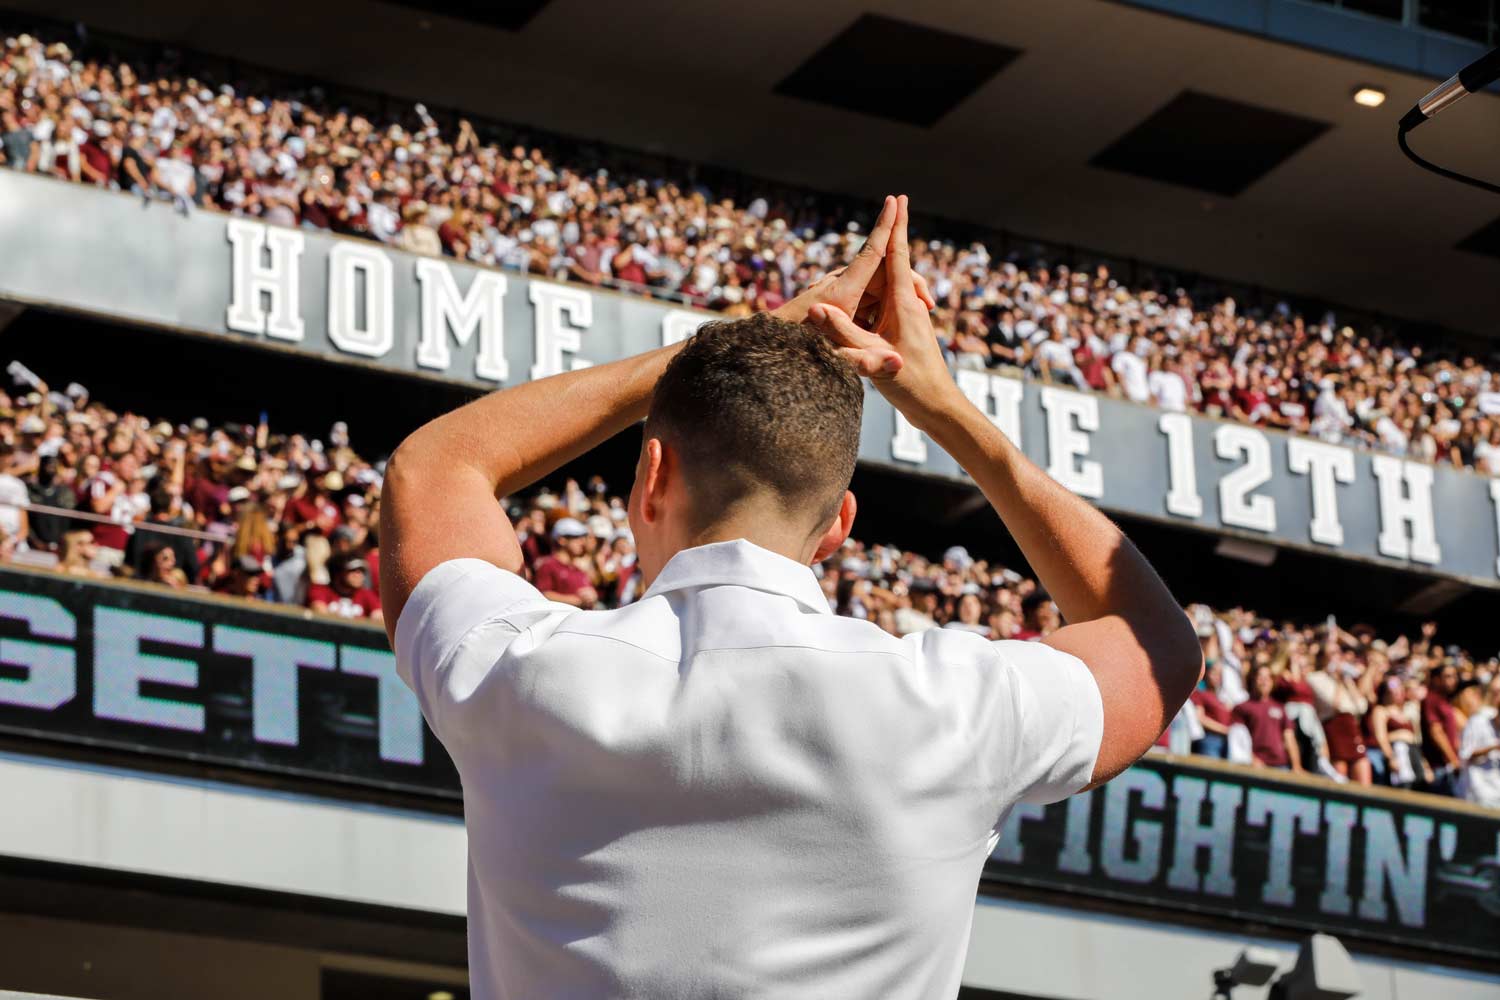 Texas A&M yell leader giving his wildcat at the end of a yell